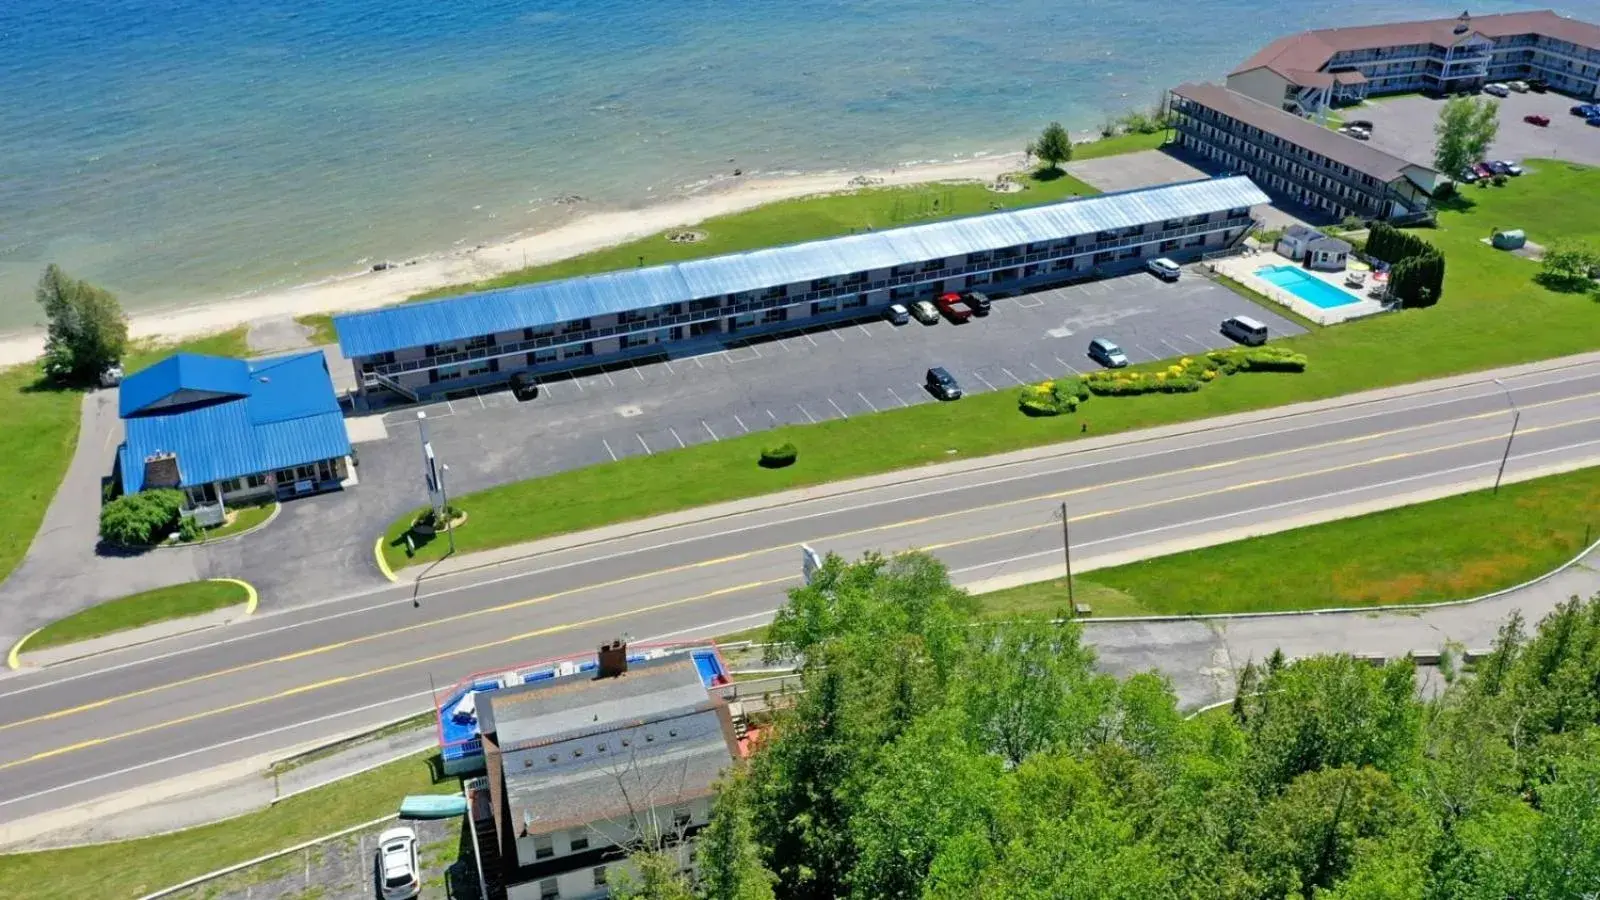 Property building, Bird's-eye View in Days Inn & Suites by Wyndham St. Ignace Lakefront